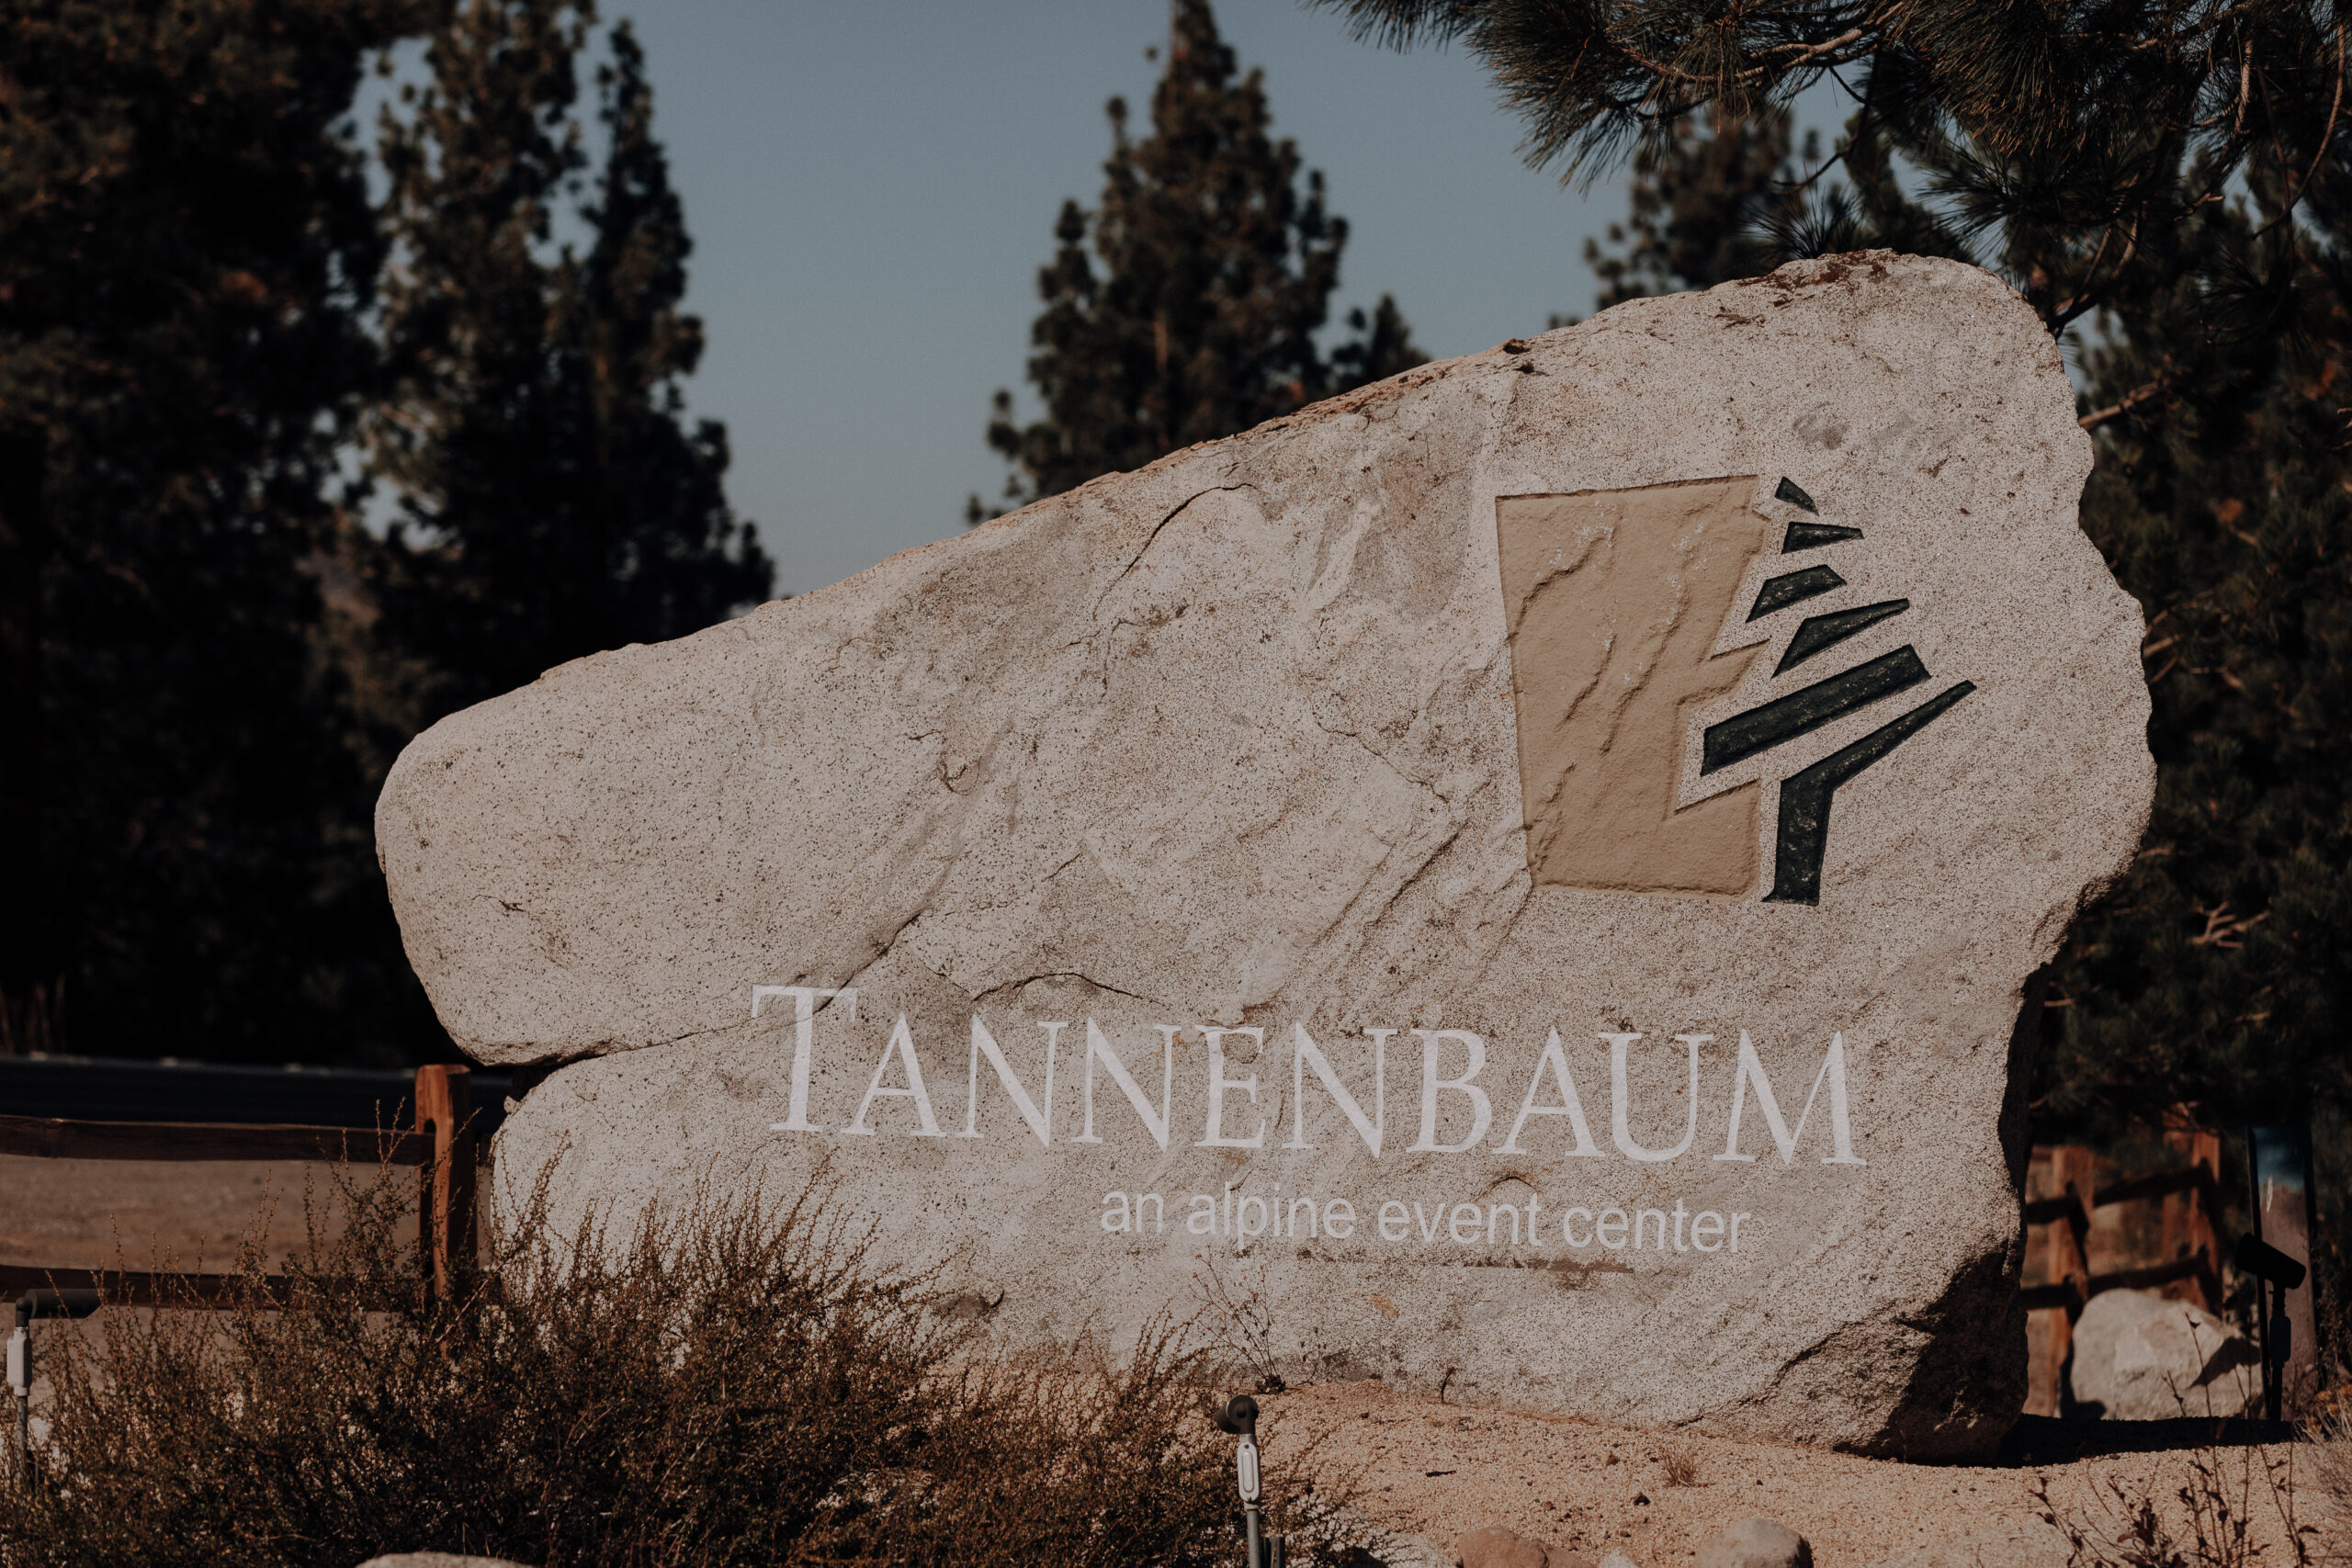 The sign at the entrance of the property that reads "Tannenbaum"